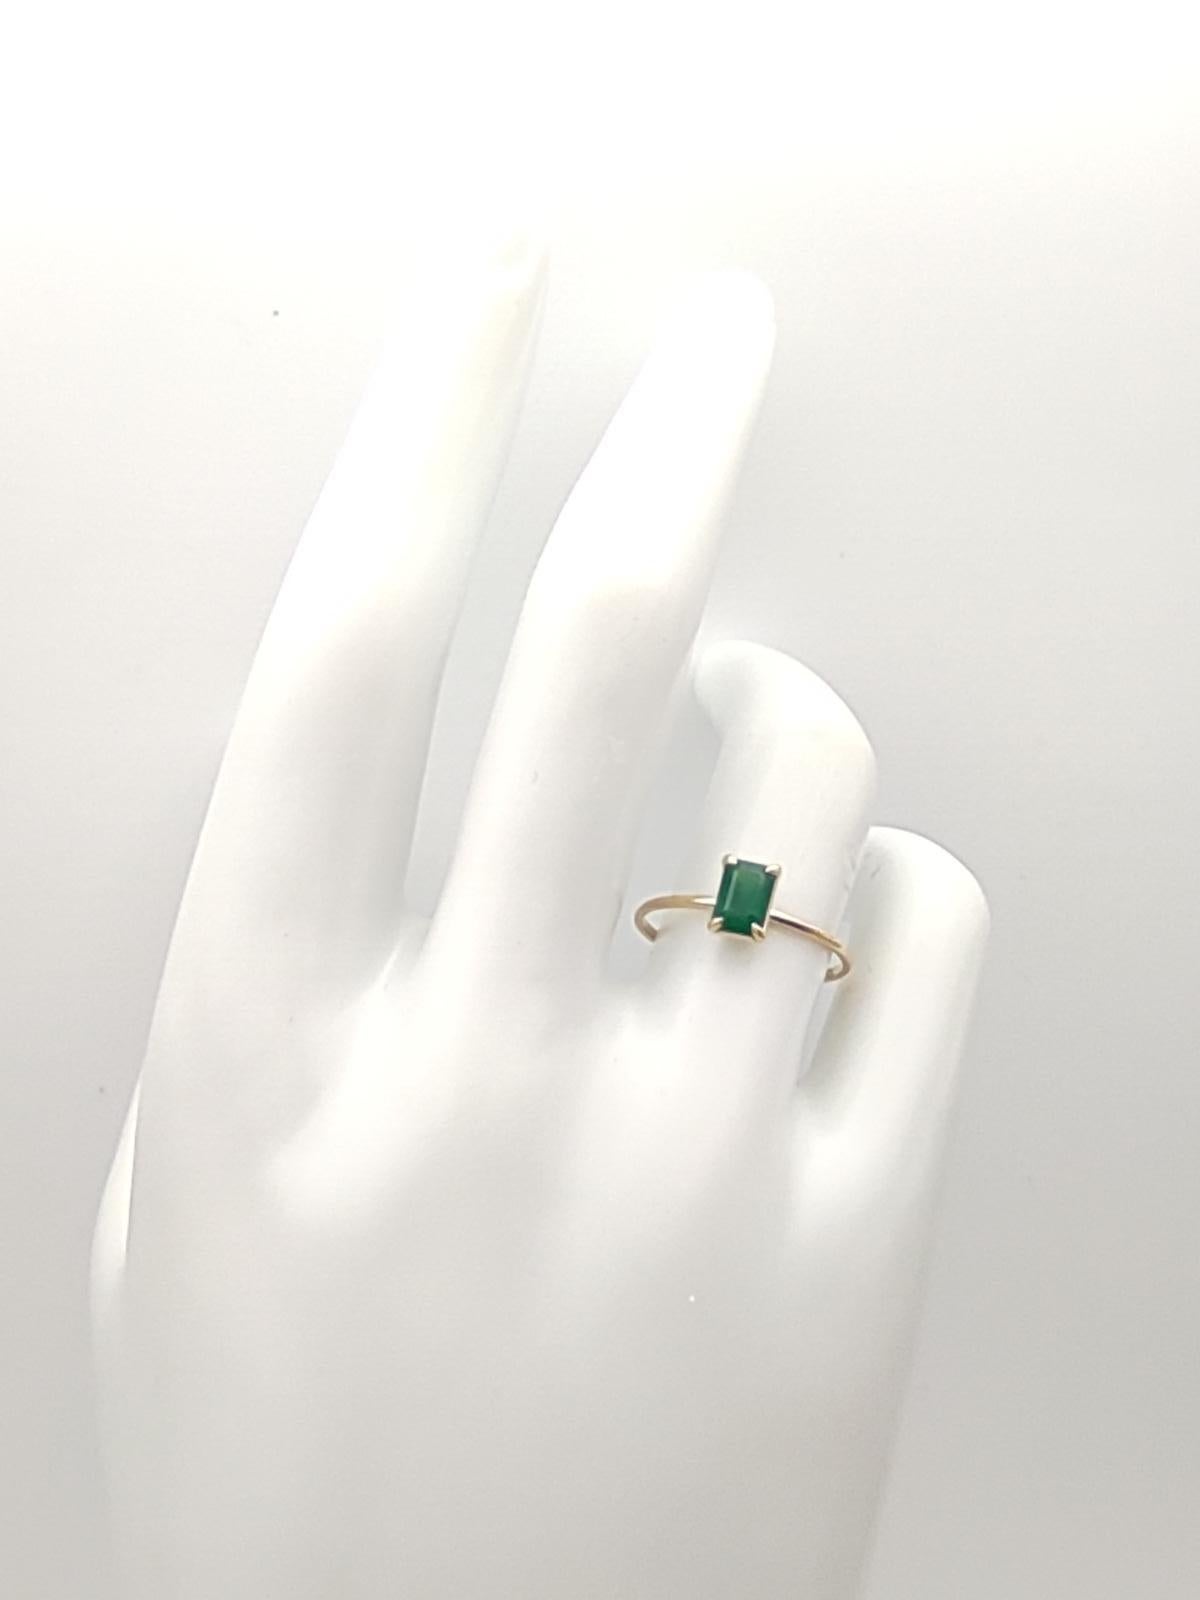 Contemporary 0.56ct Emerald in 18K Gold Minimalist Everyday Ring for Elegance and Versatility For Sale